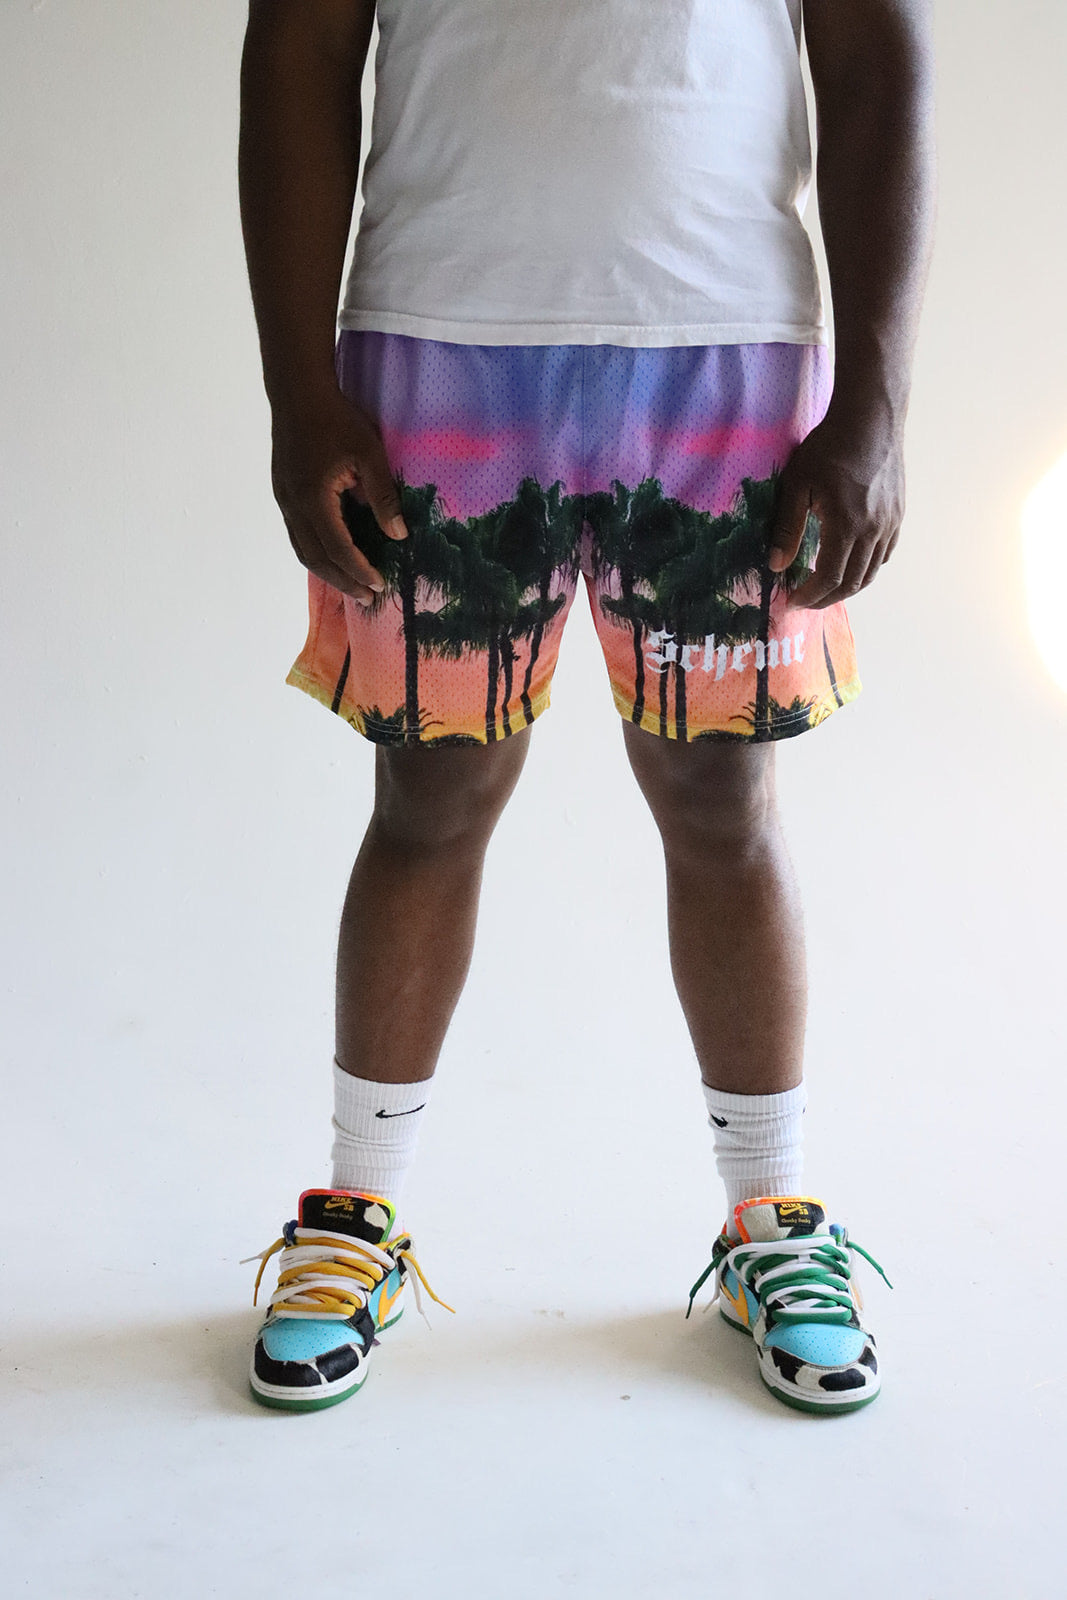 Men's graphic mesh shorts with a picture of palm trees